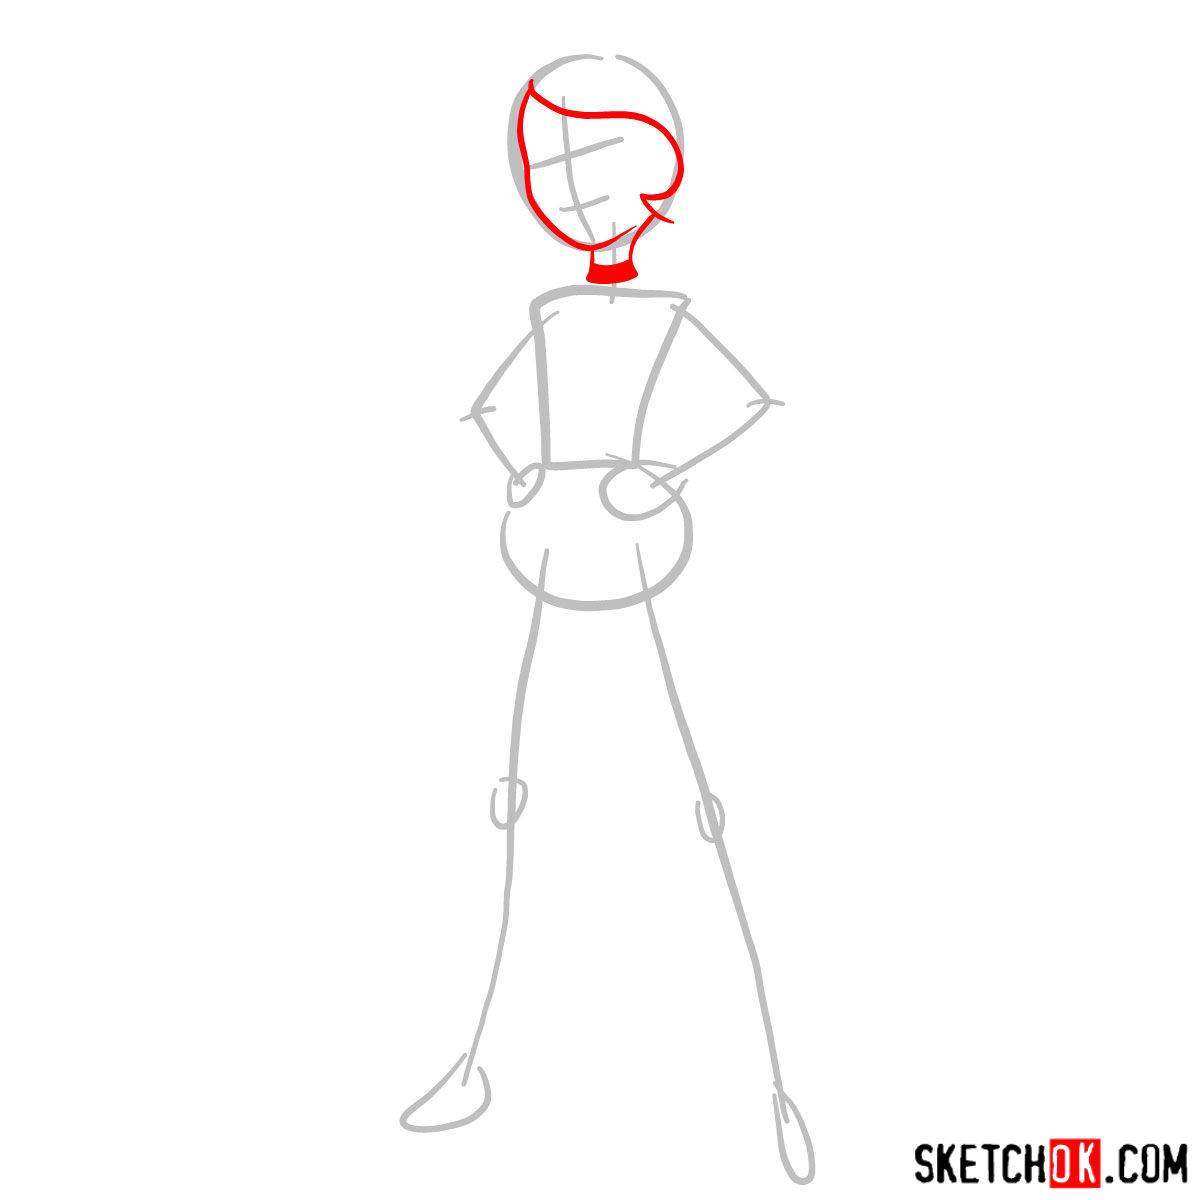 How to draw Elastigirl from The Incredibles - step 02